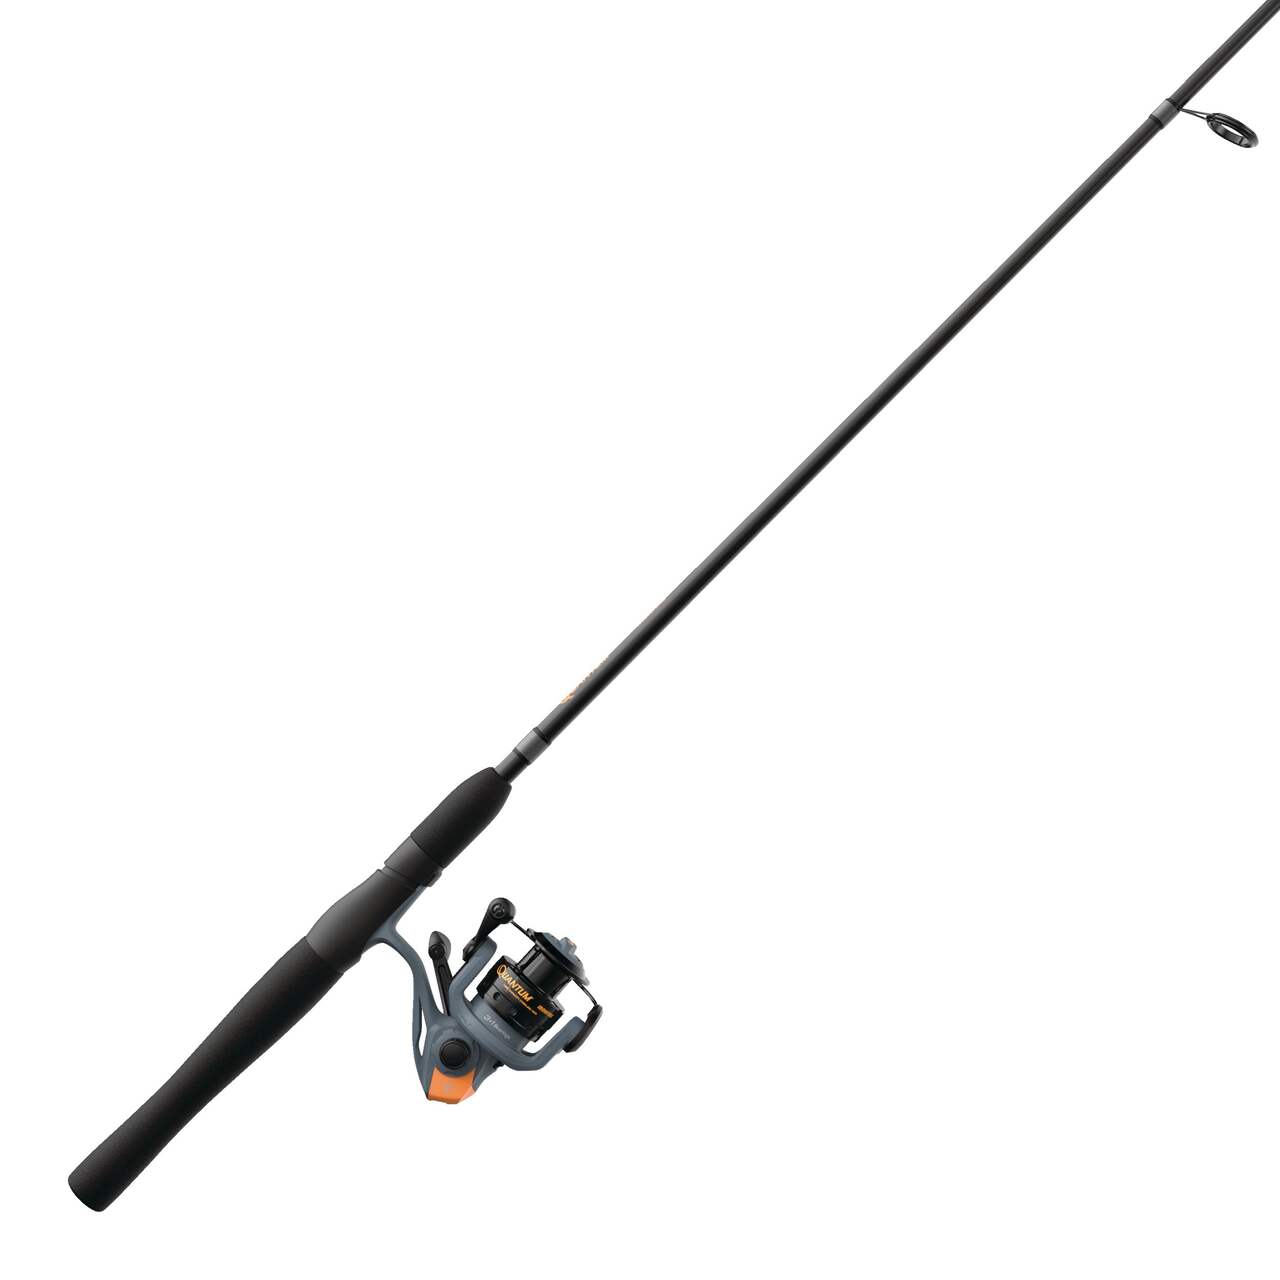 Quantum Iron Fire Spinning Fishing Rod and Reel Combo, Anti